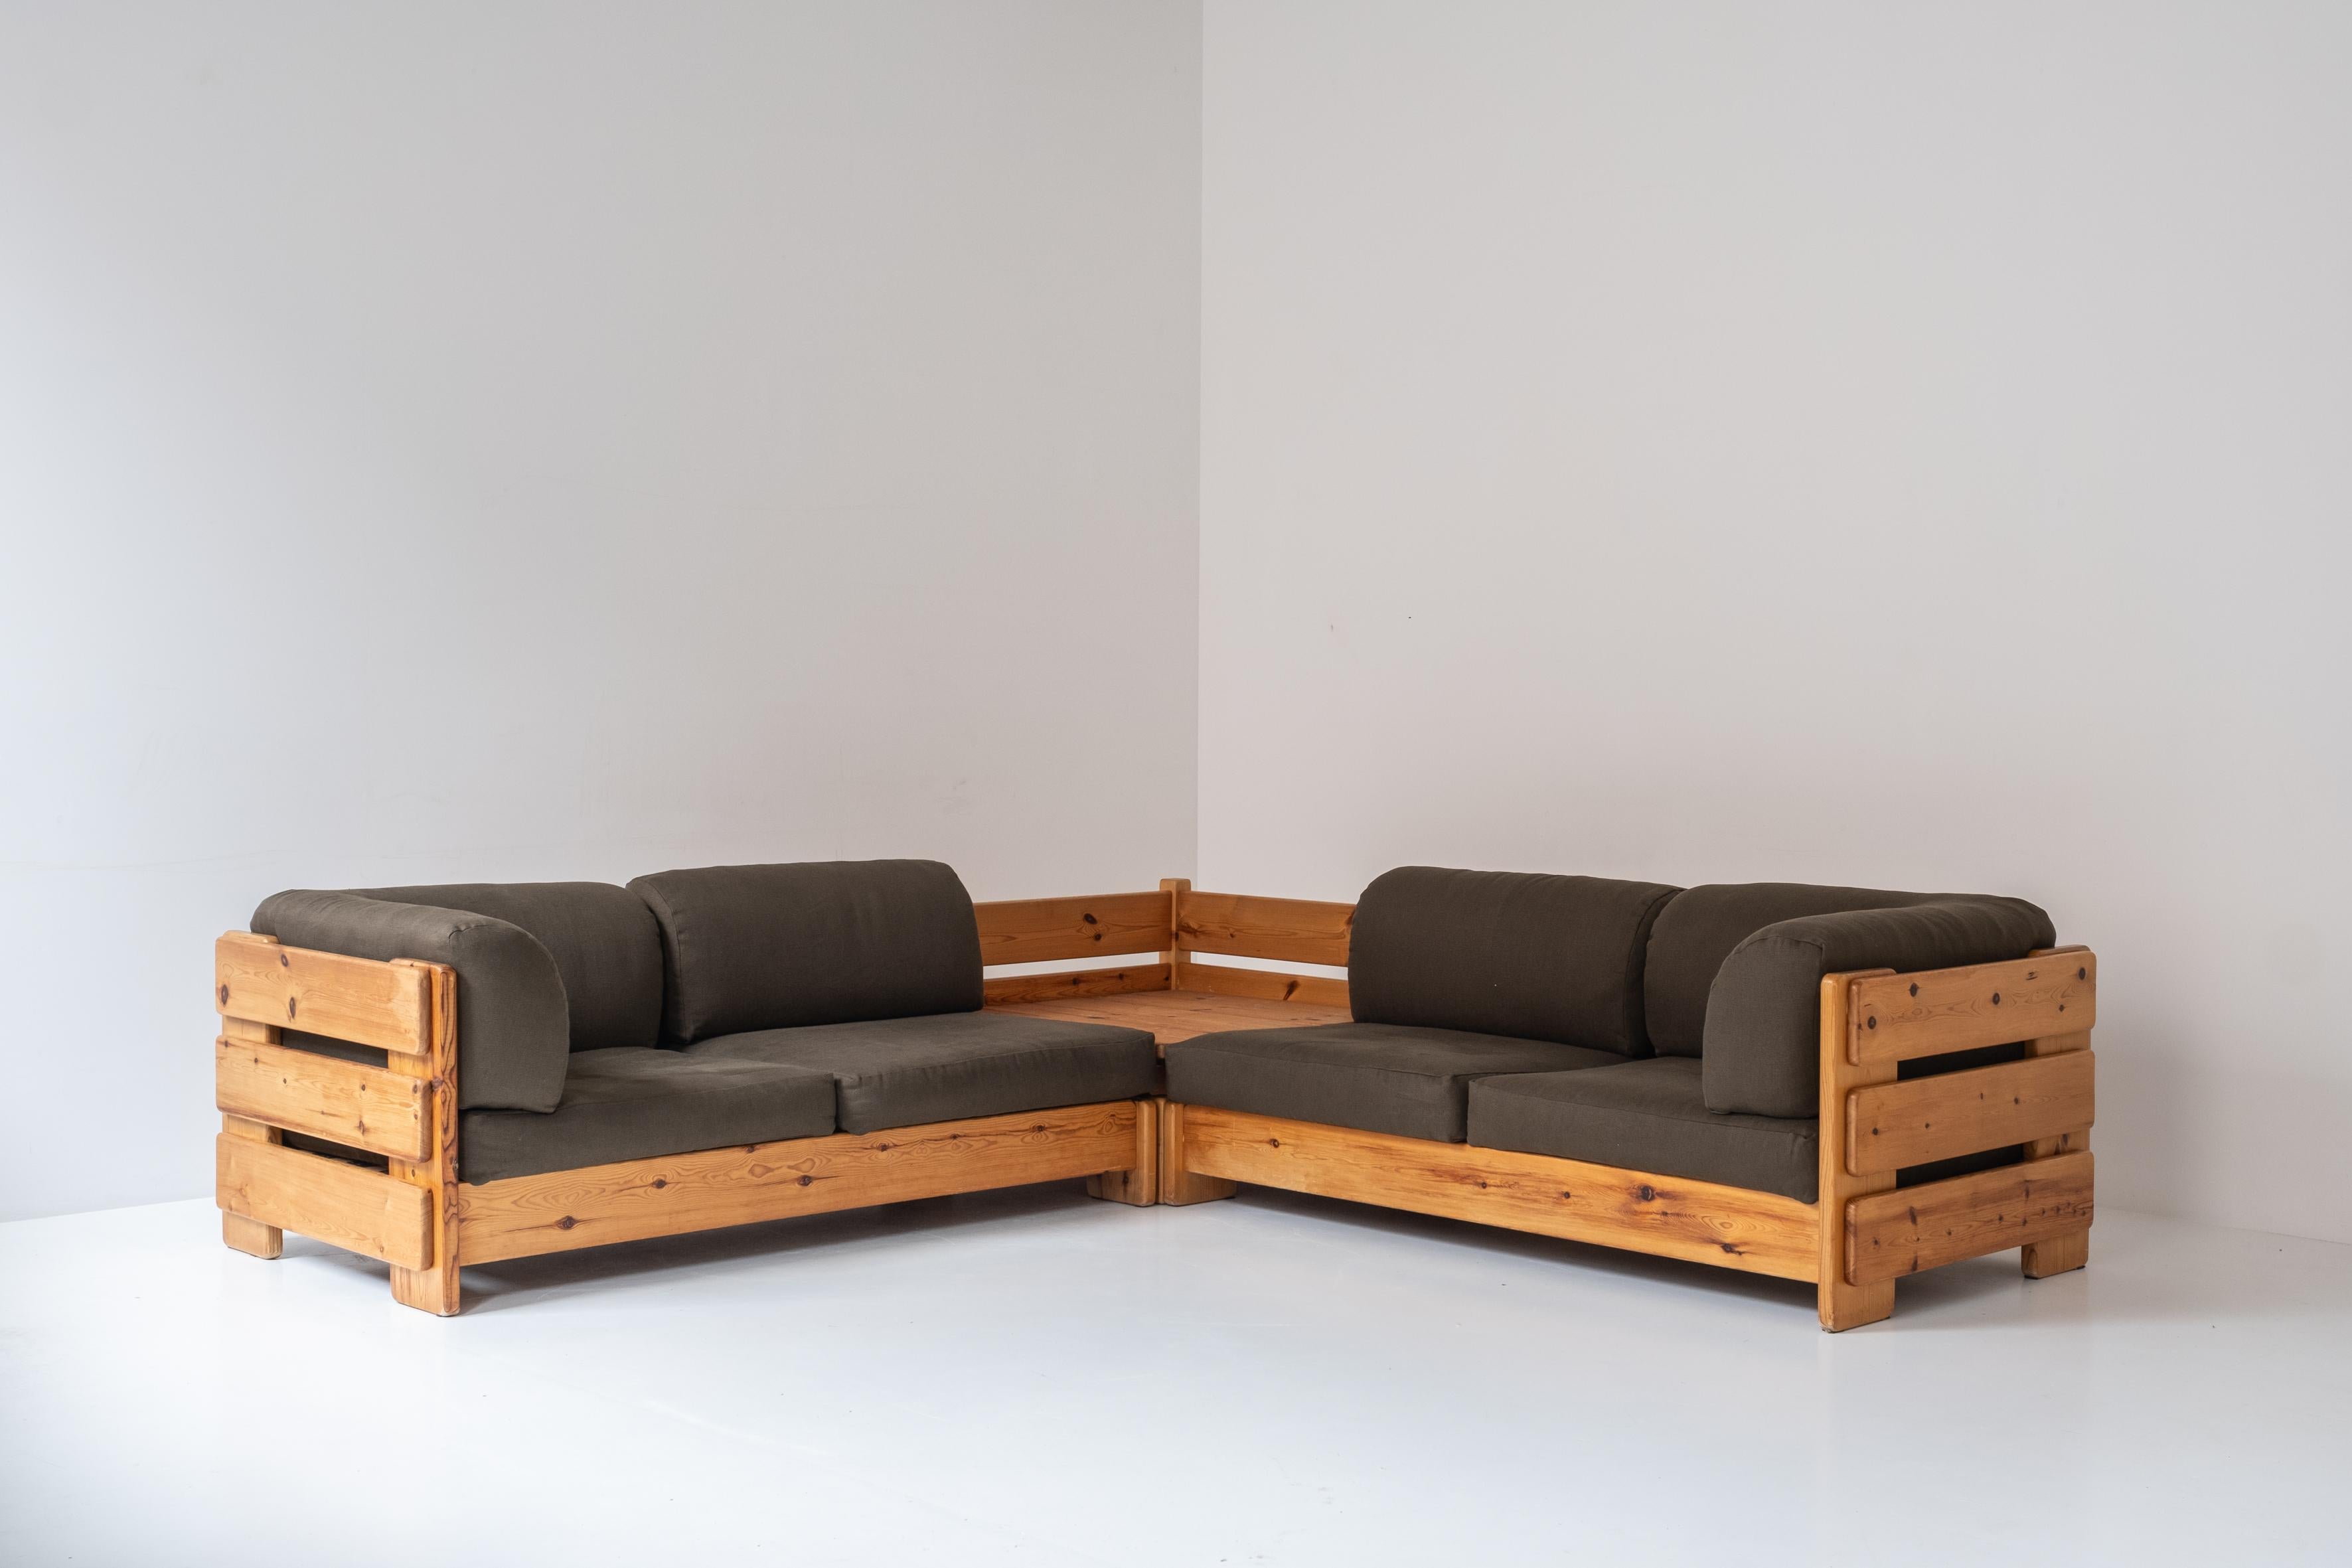 Seating group from France, designed and manufactured during the 1960s. This corner sofa is made out of solid pine slats and the cushions are freshly re-upholstered in a green fabric. Because of the fact that this unit consist of three individually